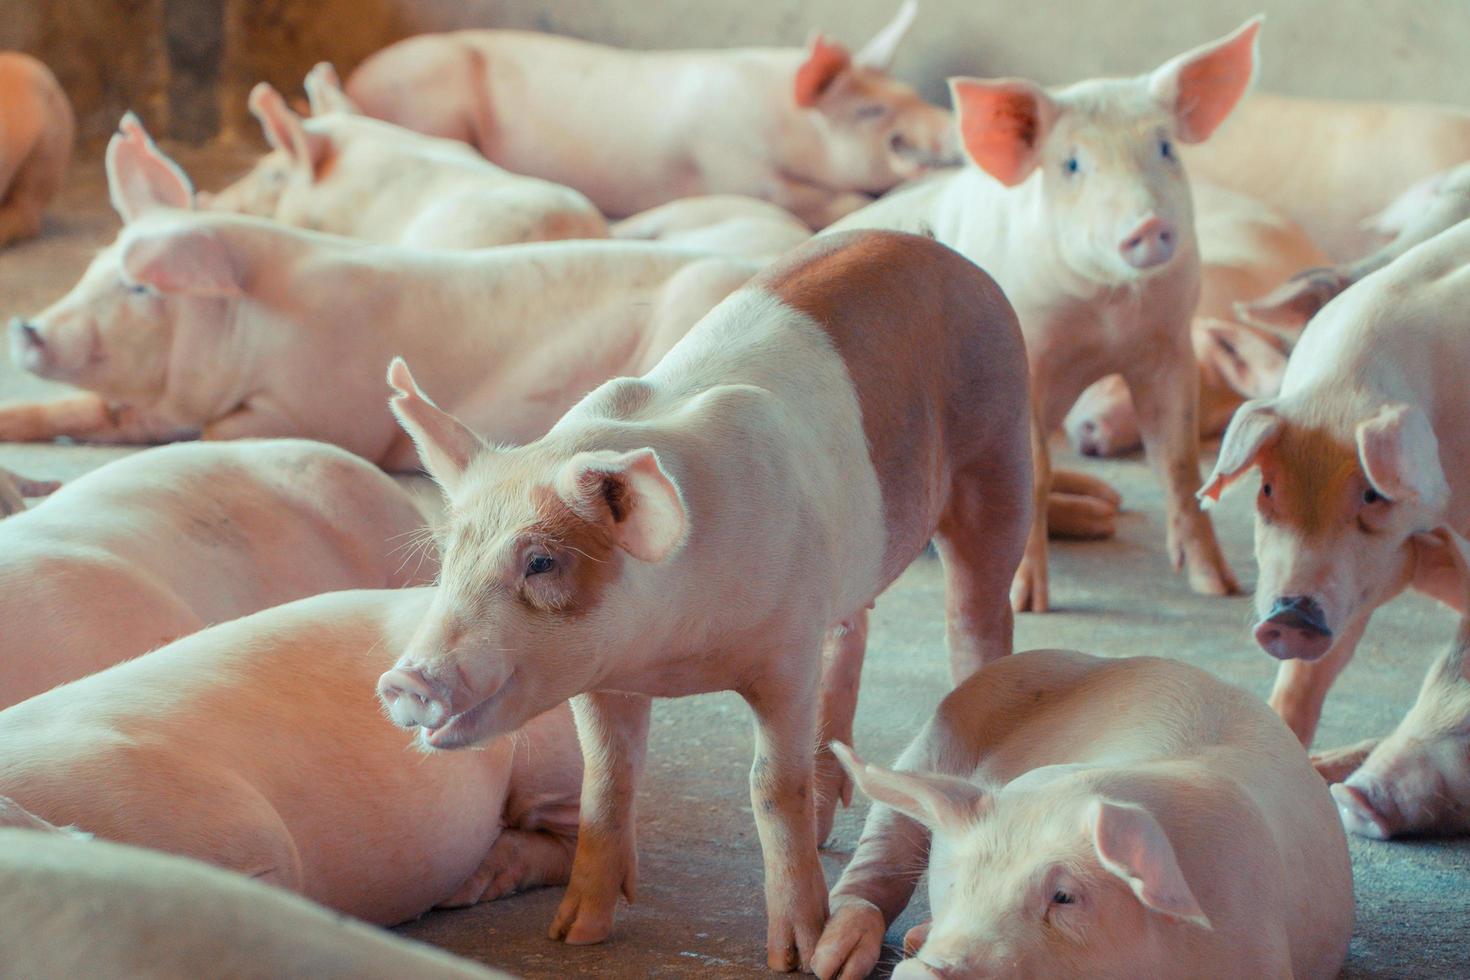 Group of pig that looks healthy in local ASEAN pig farm at livestock. The concept of standardized and clean farming without local diseases or conditions that affect pig growth or fecundity photo